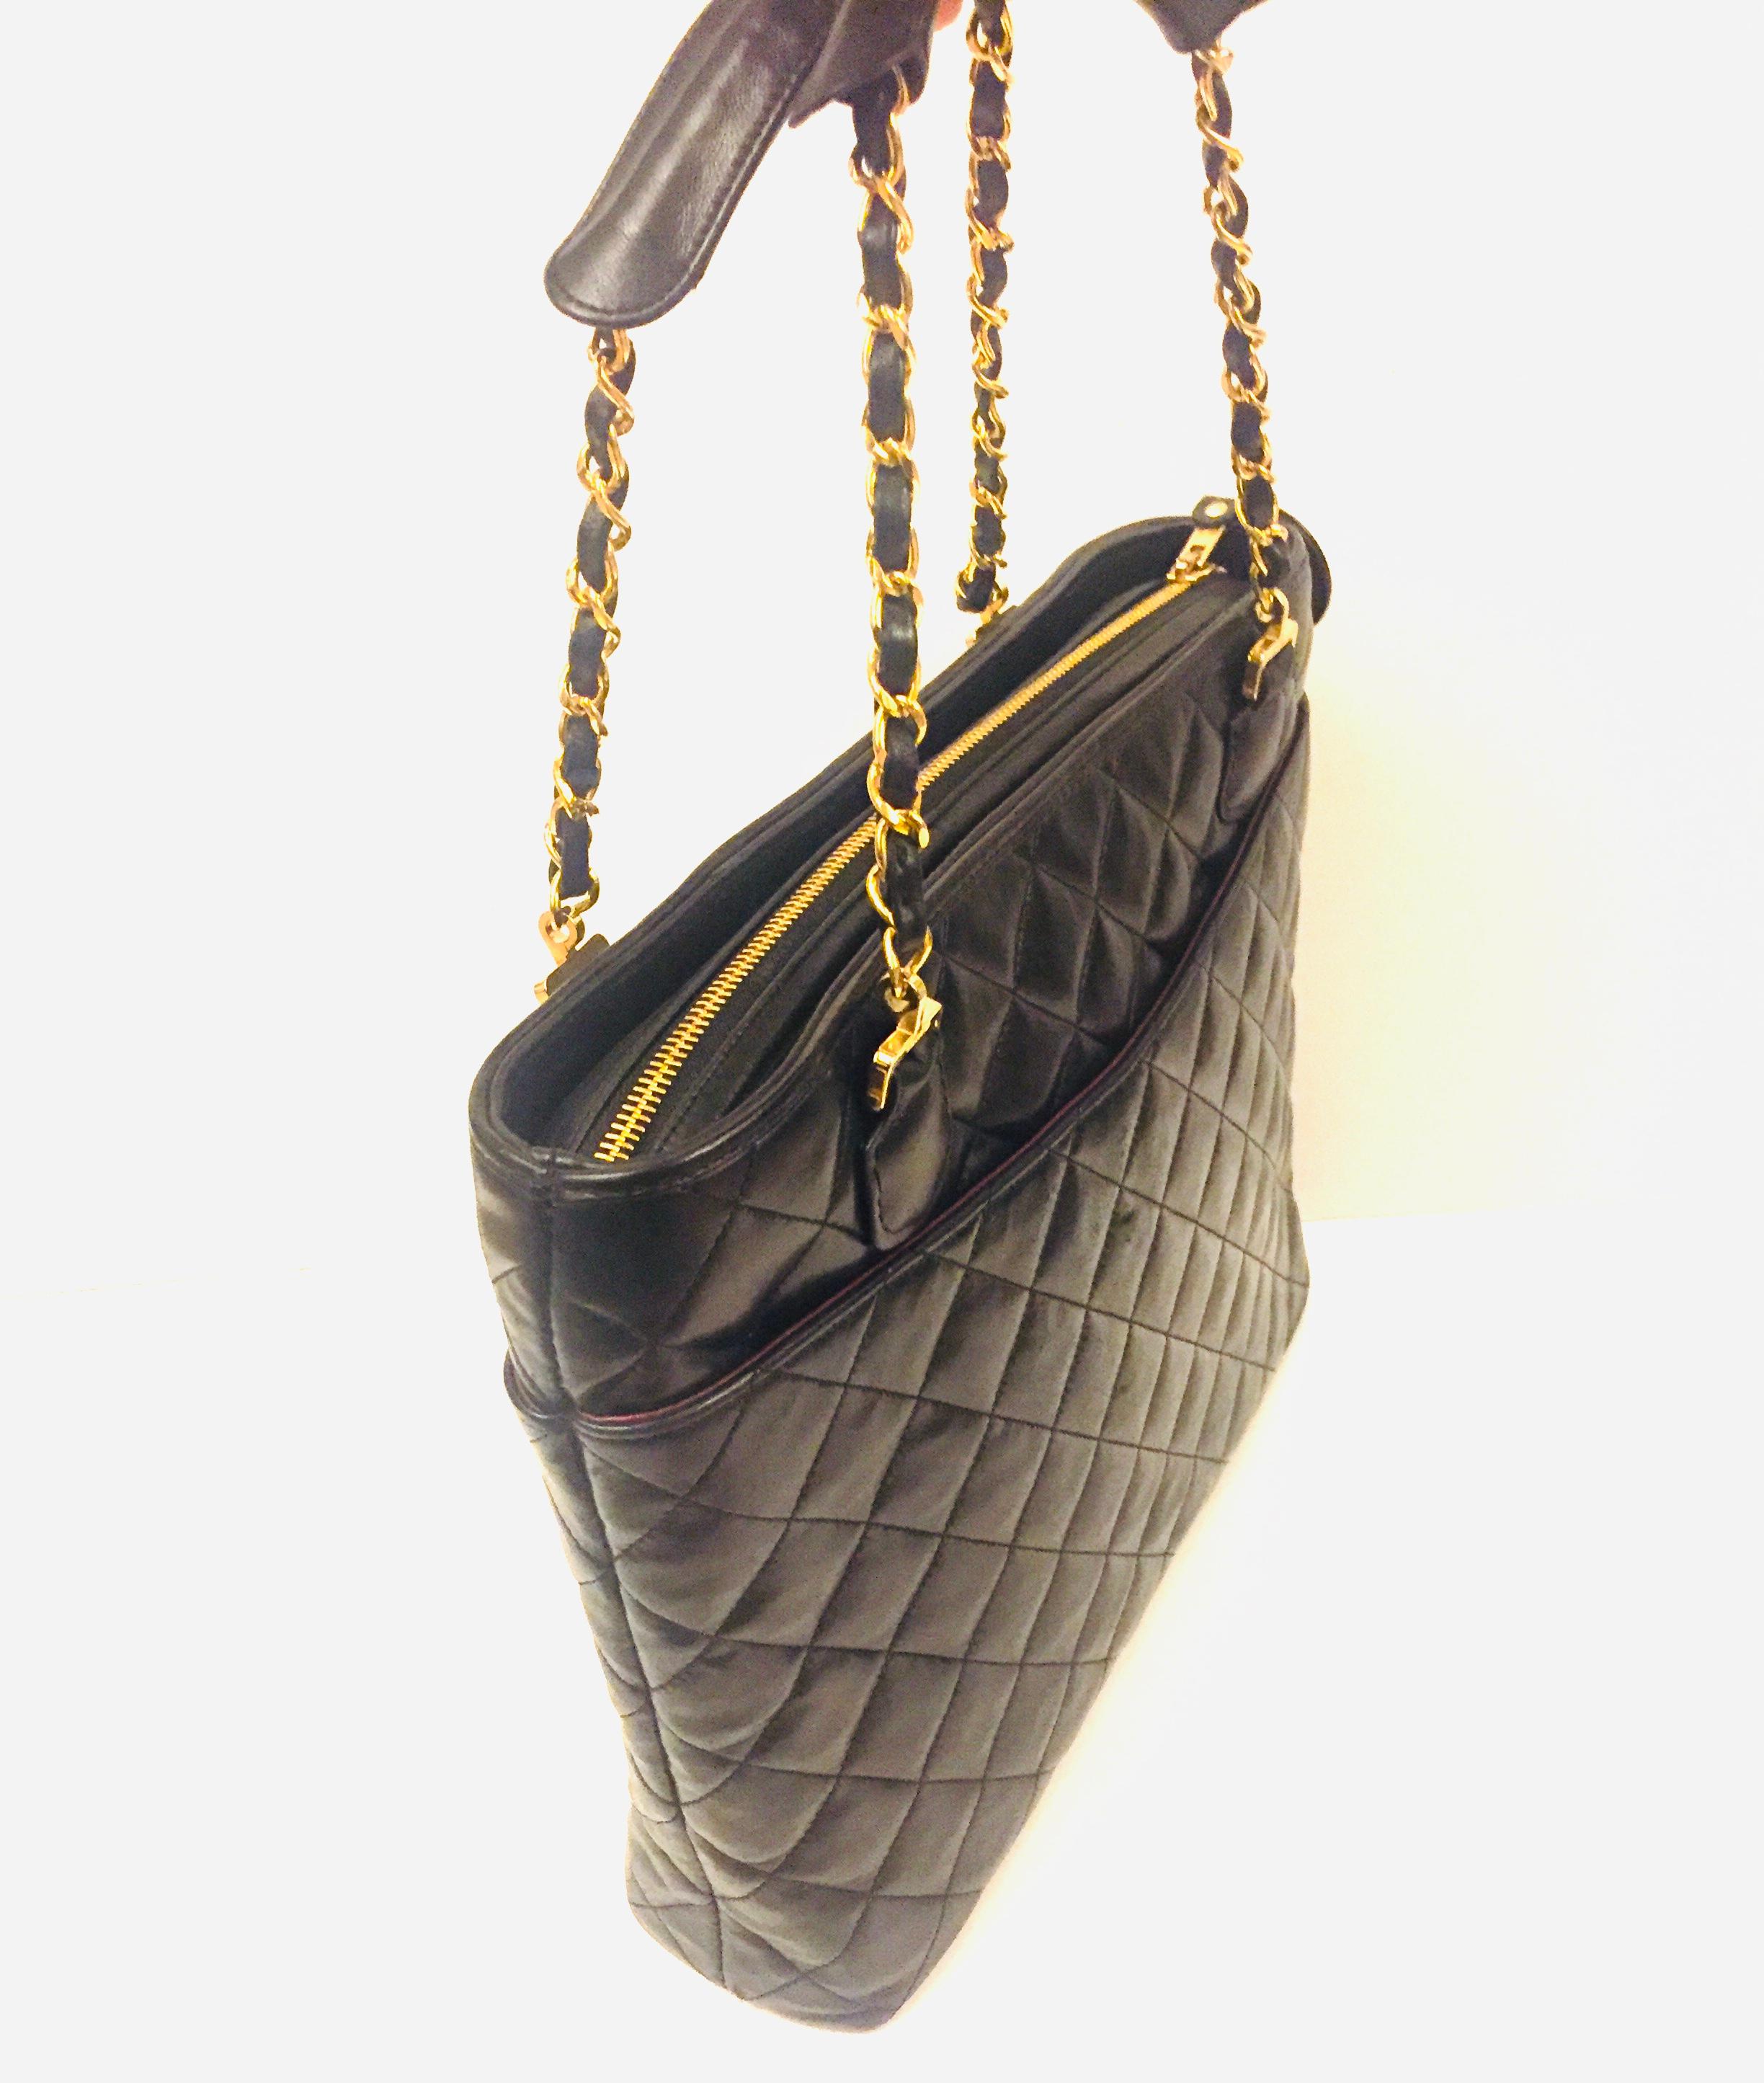 - Vintage 80s Chanel black quilted lambskin leather tote bag.  

- 